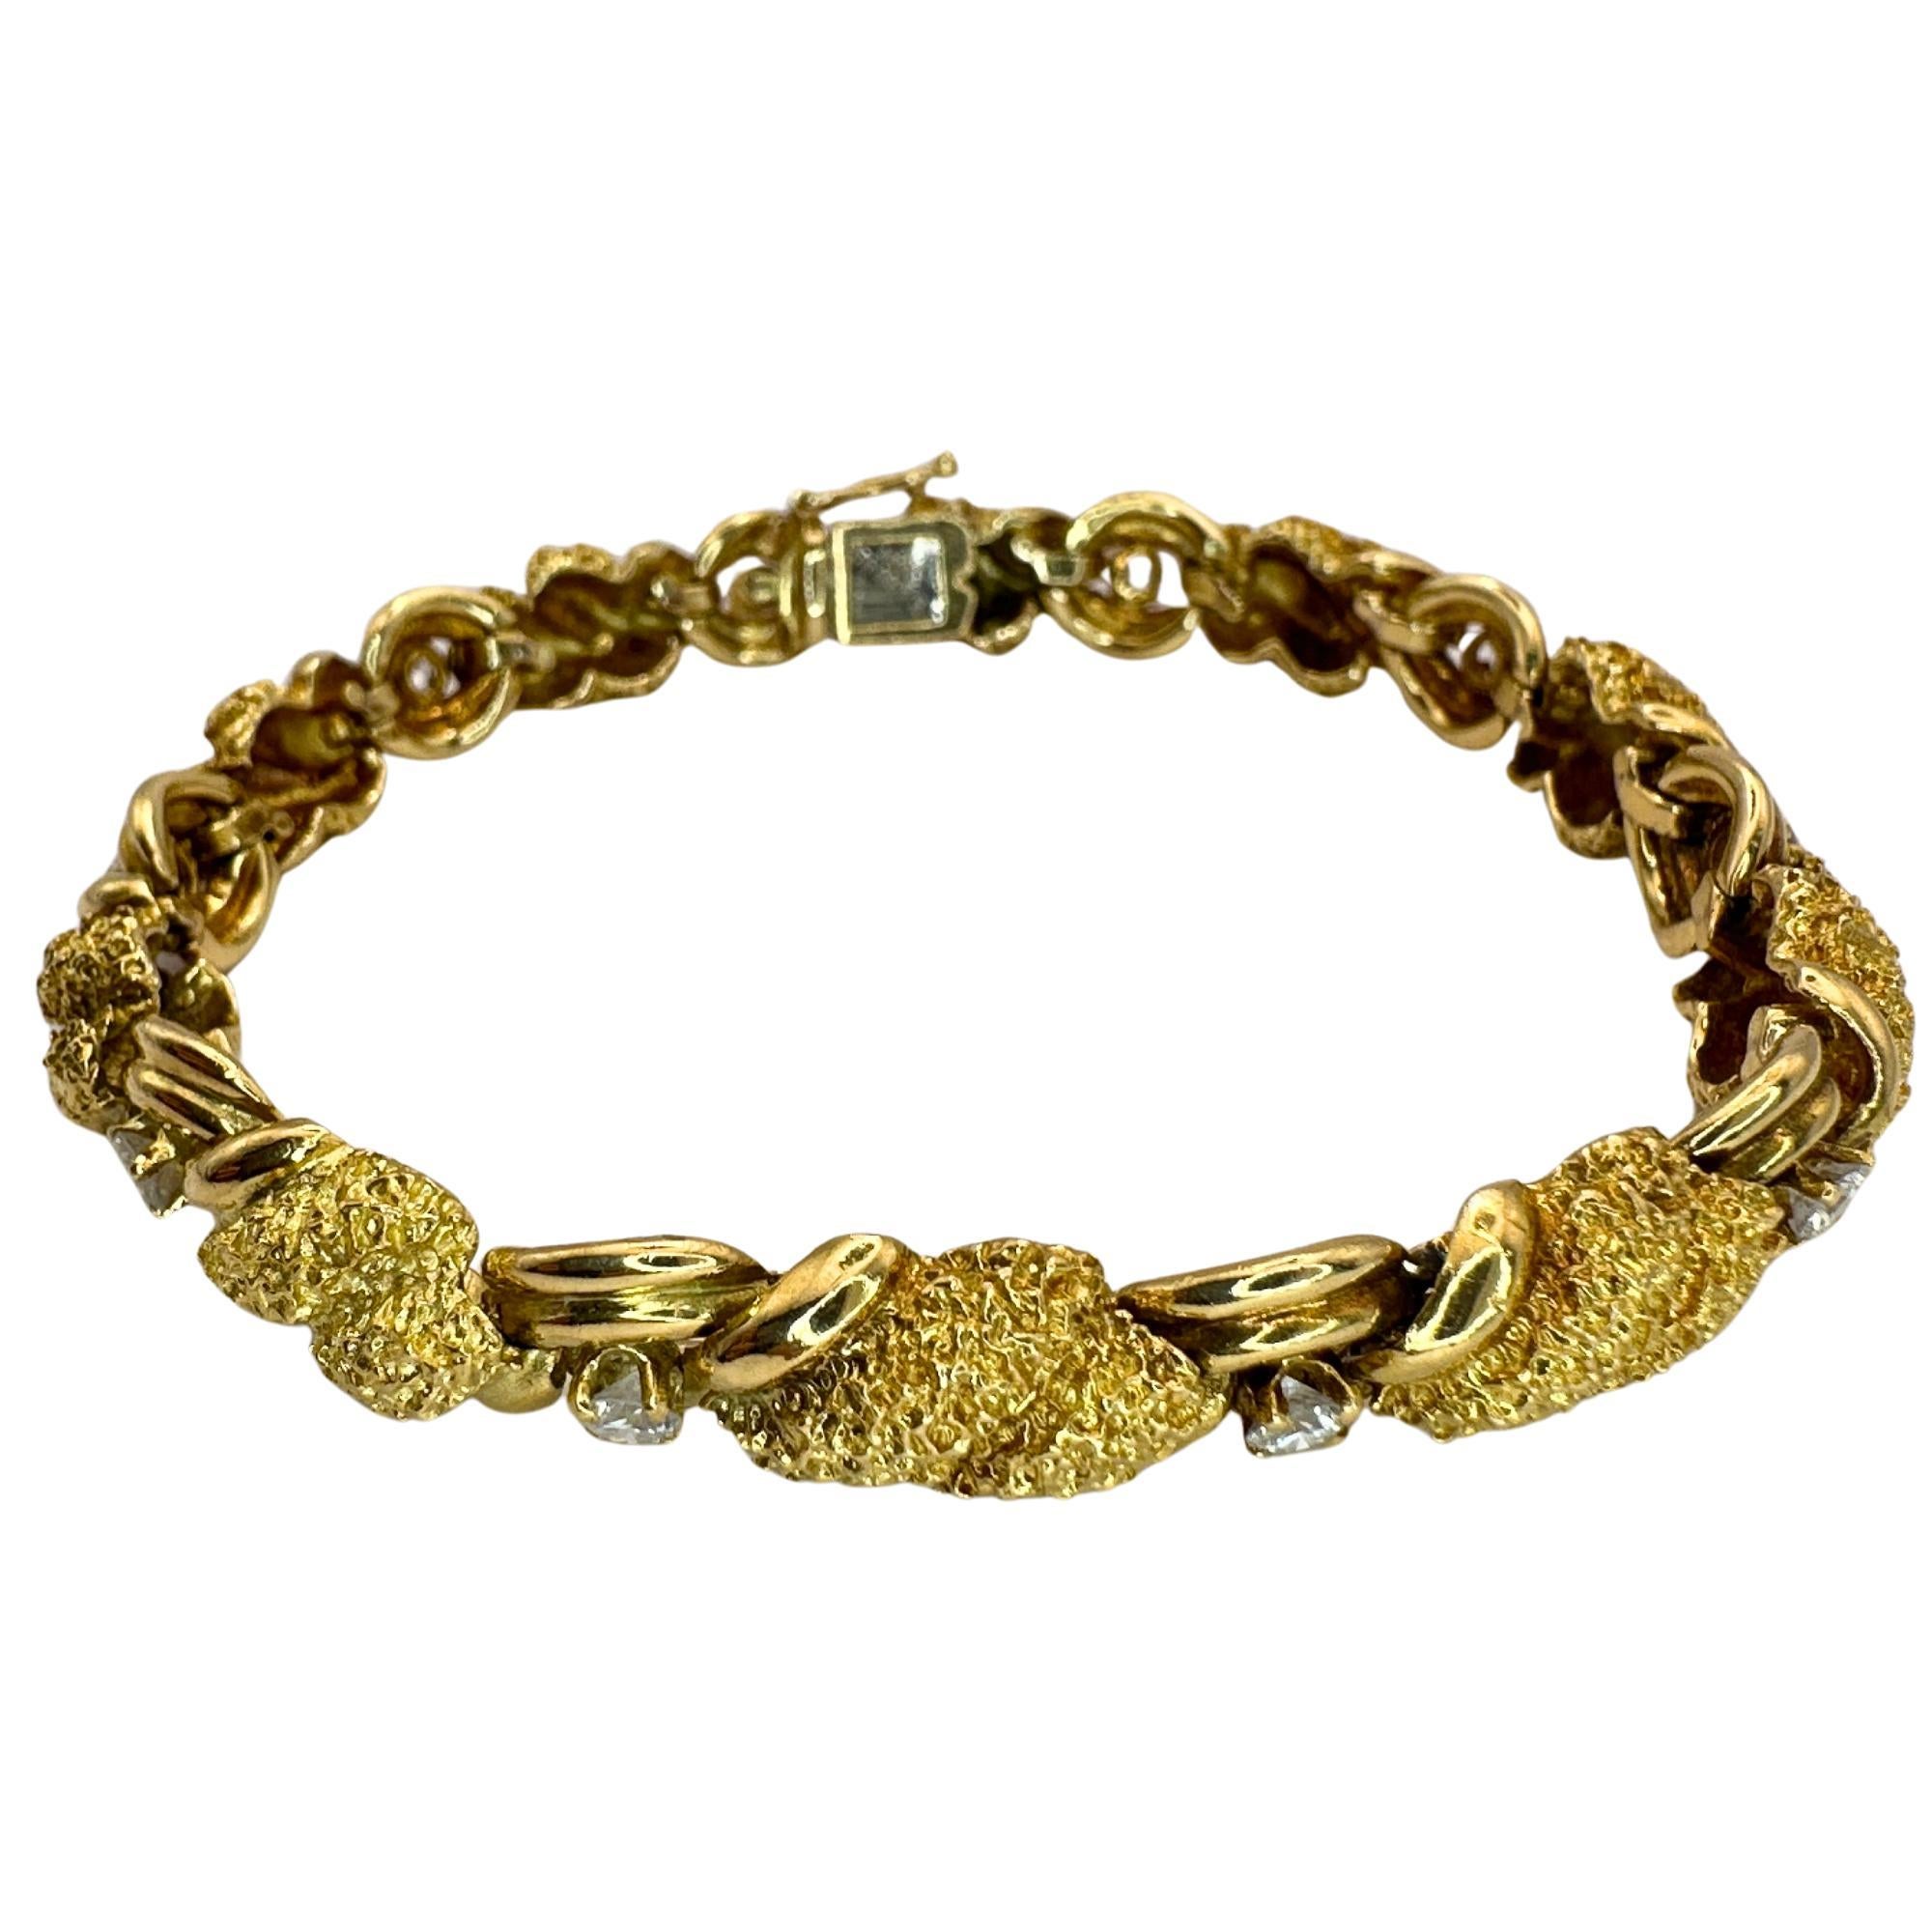 This vintage Tiffany & Co bracelet from the 1960's exudes elegance and quality. Crafted with 18k yellow gold and embellished with approximately 1.00 carats of diamonds, it radiates luxury and sophistication. In good condition with minimal wear, this